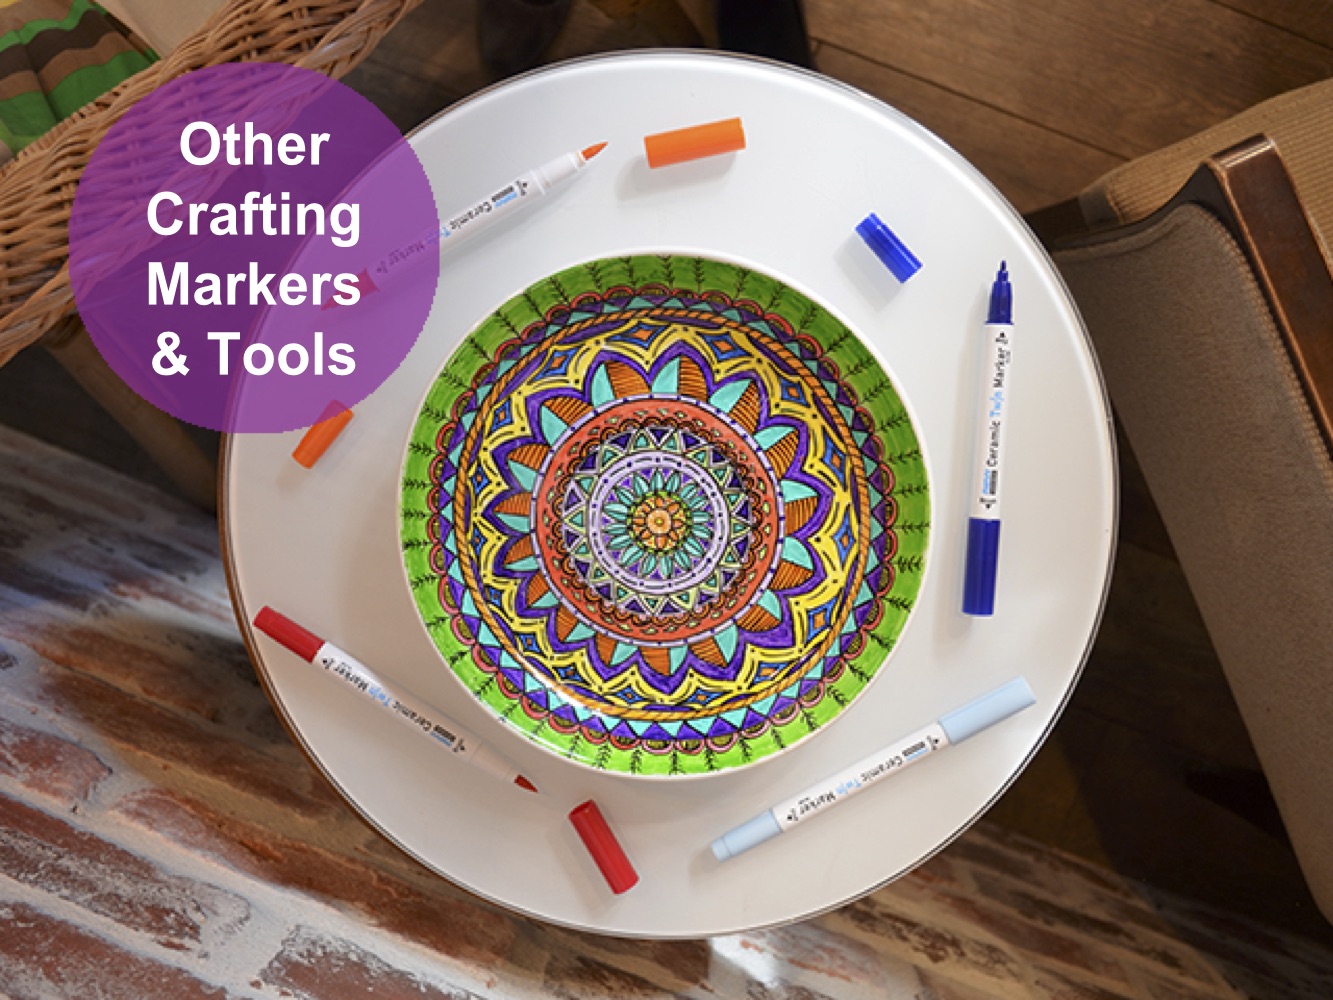 Other Crafting Markers & Tools